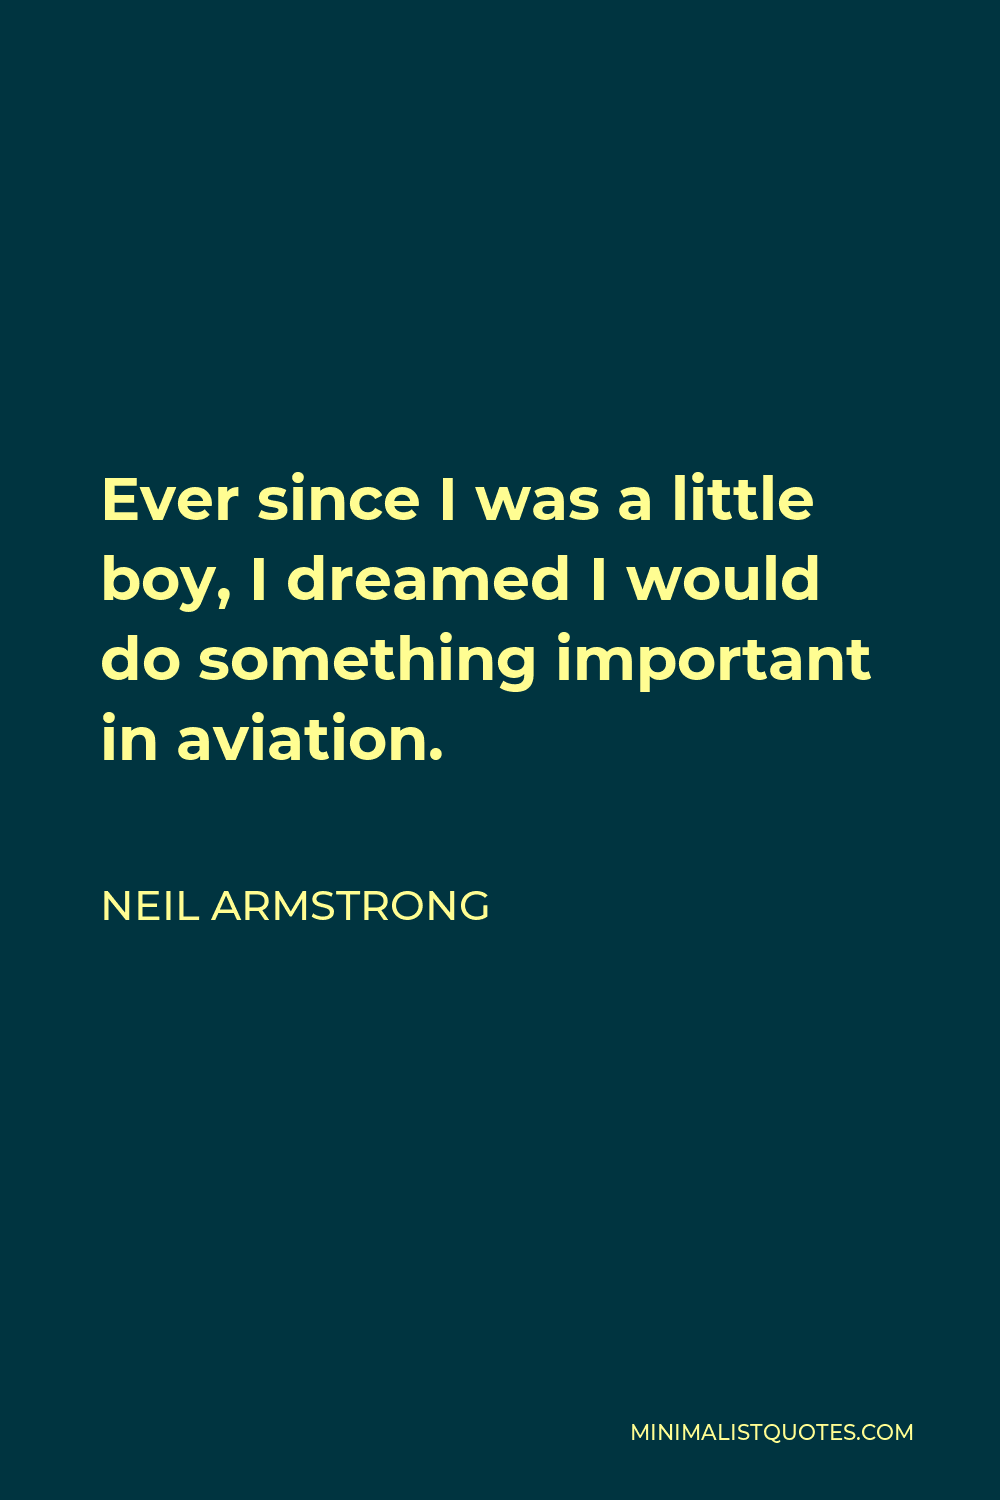 Neil Armstrong Quote - Ever since I was a little boy, I dreamed I would do something important in aviation.